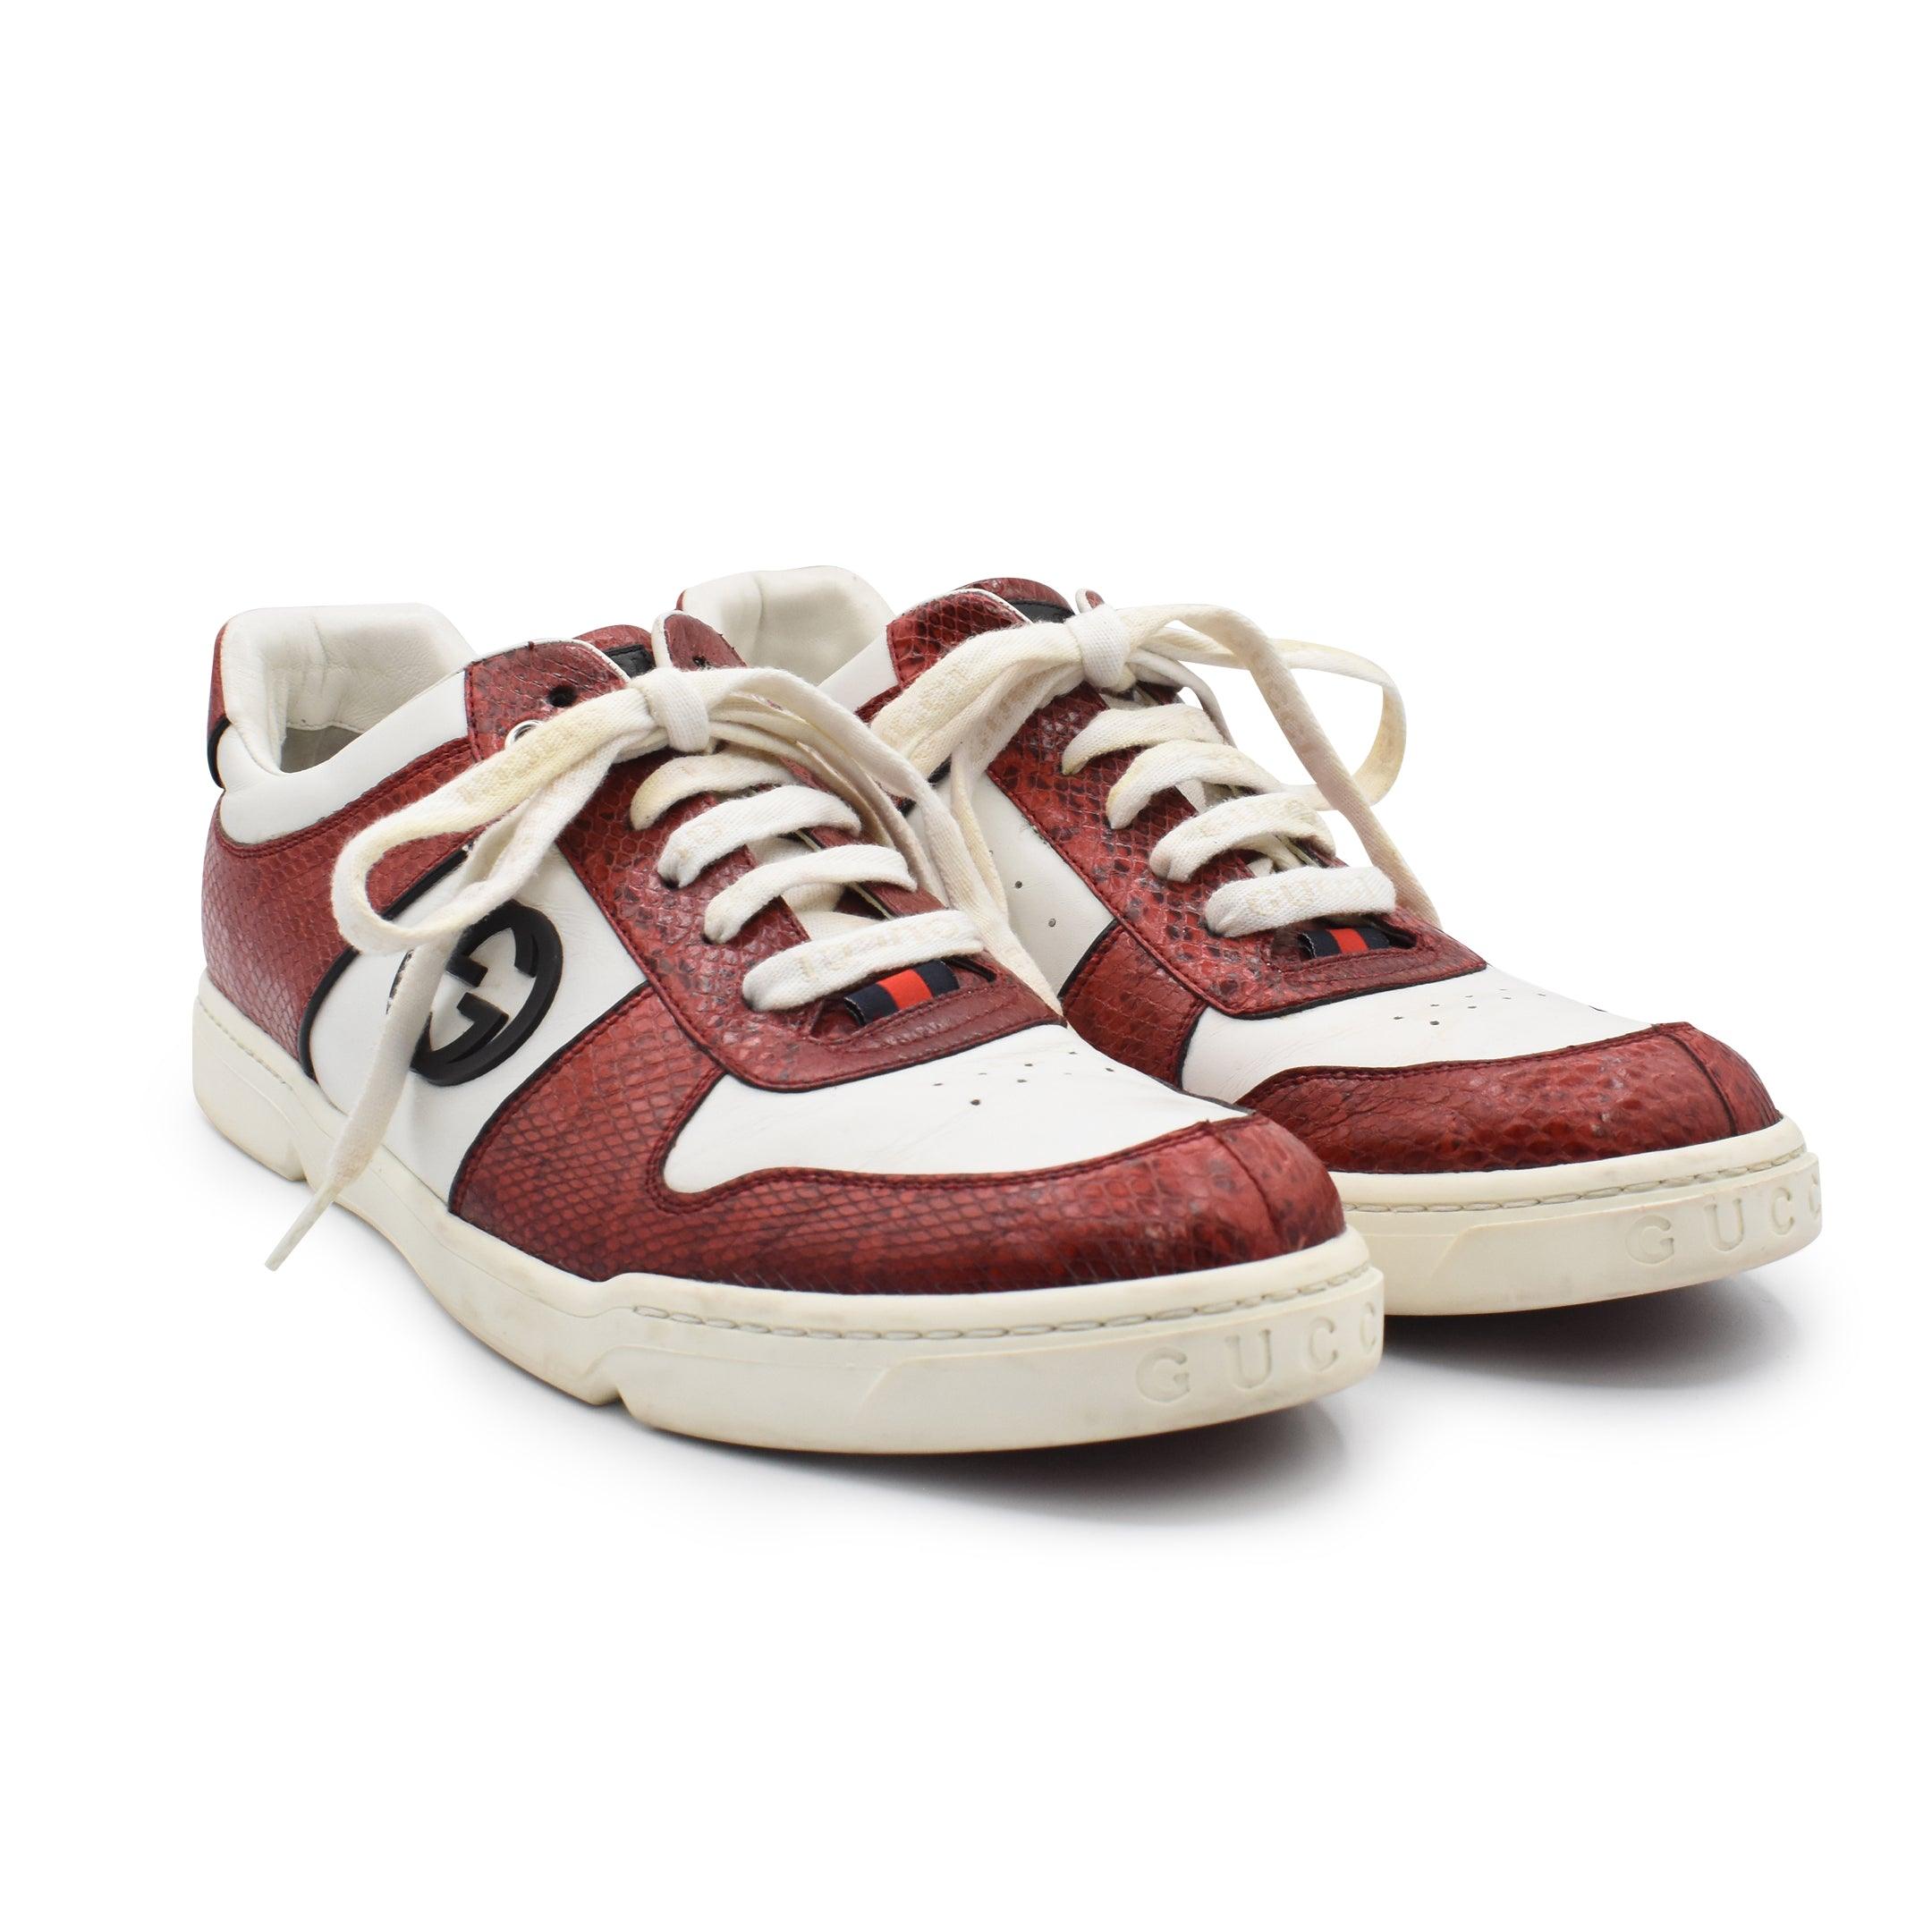 Gucci Sneakers - Men's 10.5 - Fashionably Yours